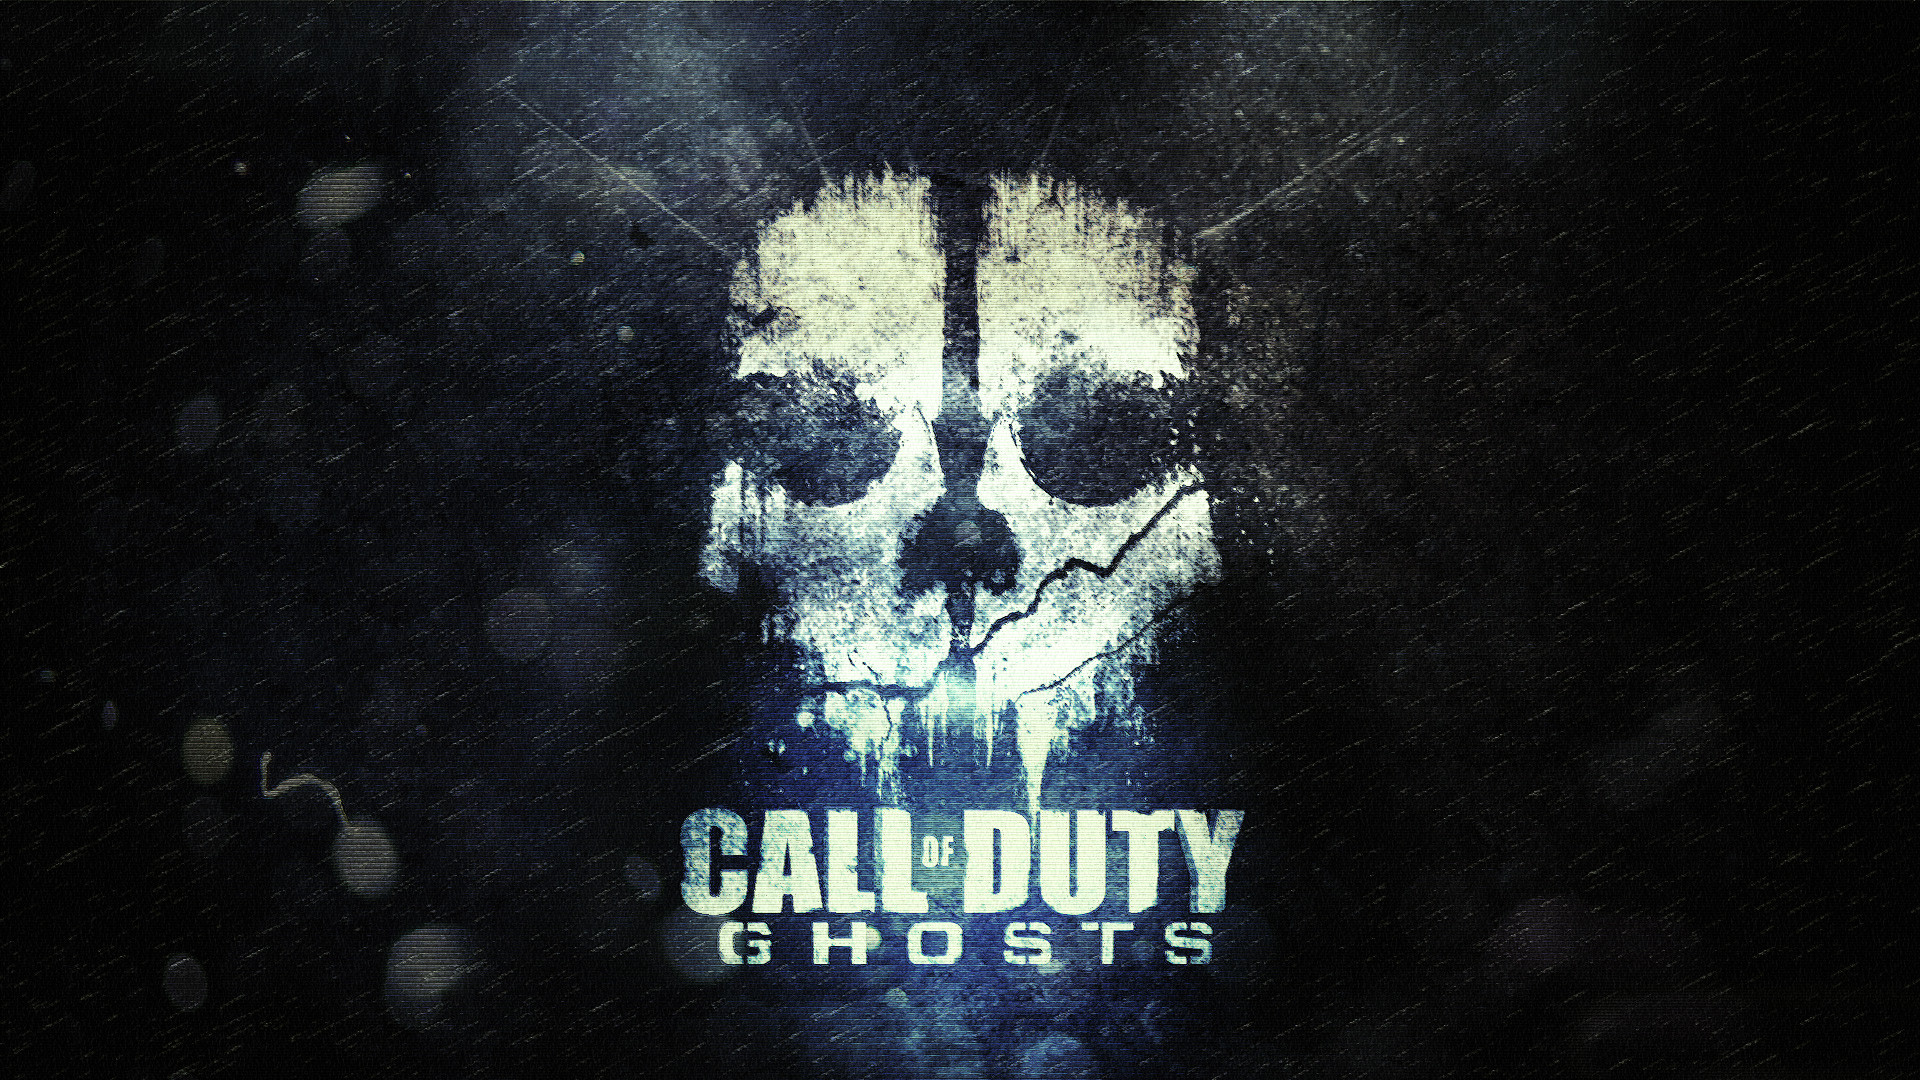 1920x1080 1920 x 1080 - Call of Duty Ghosts Wallpaper - Ghost Logo Design